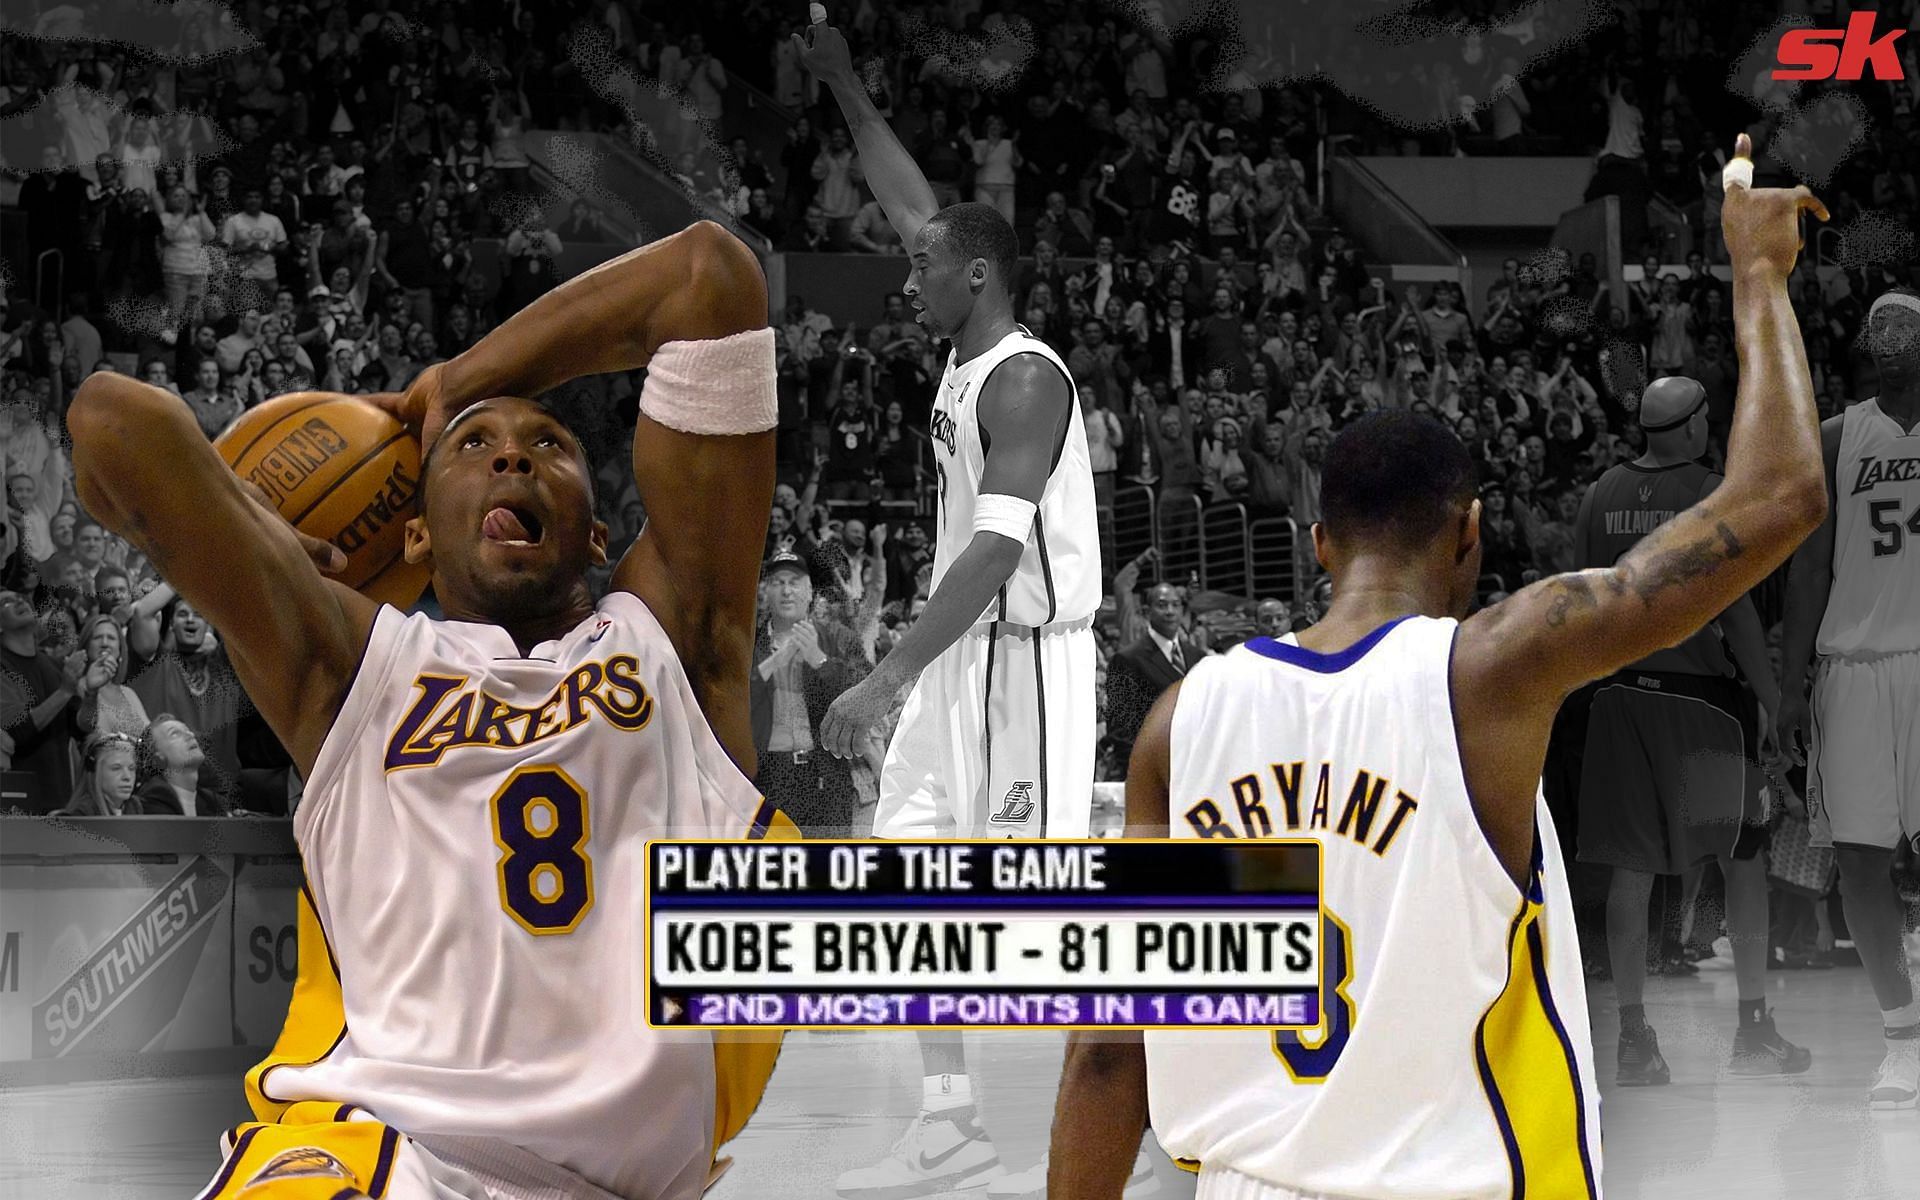 Watch: Kobe Bryant with a historic 81-point performance vs the